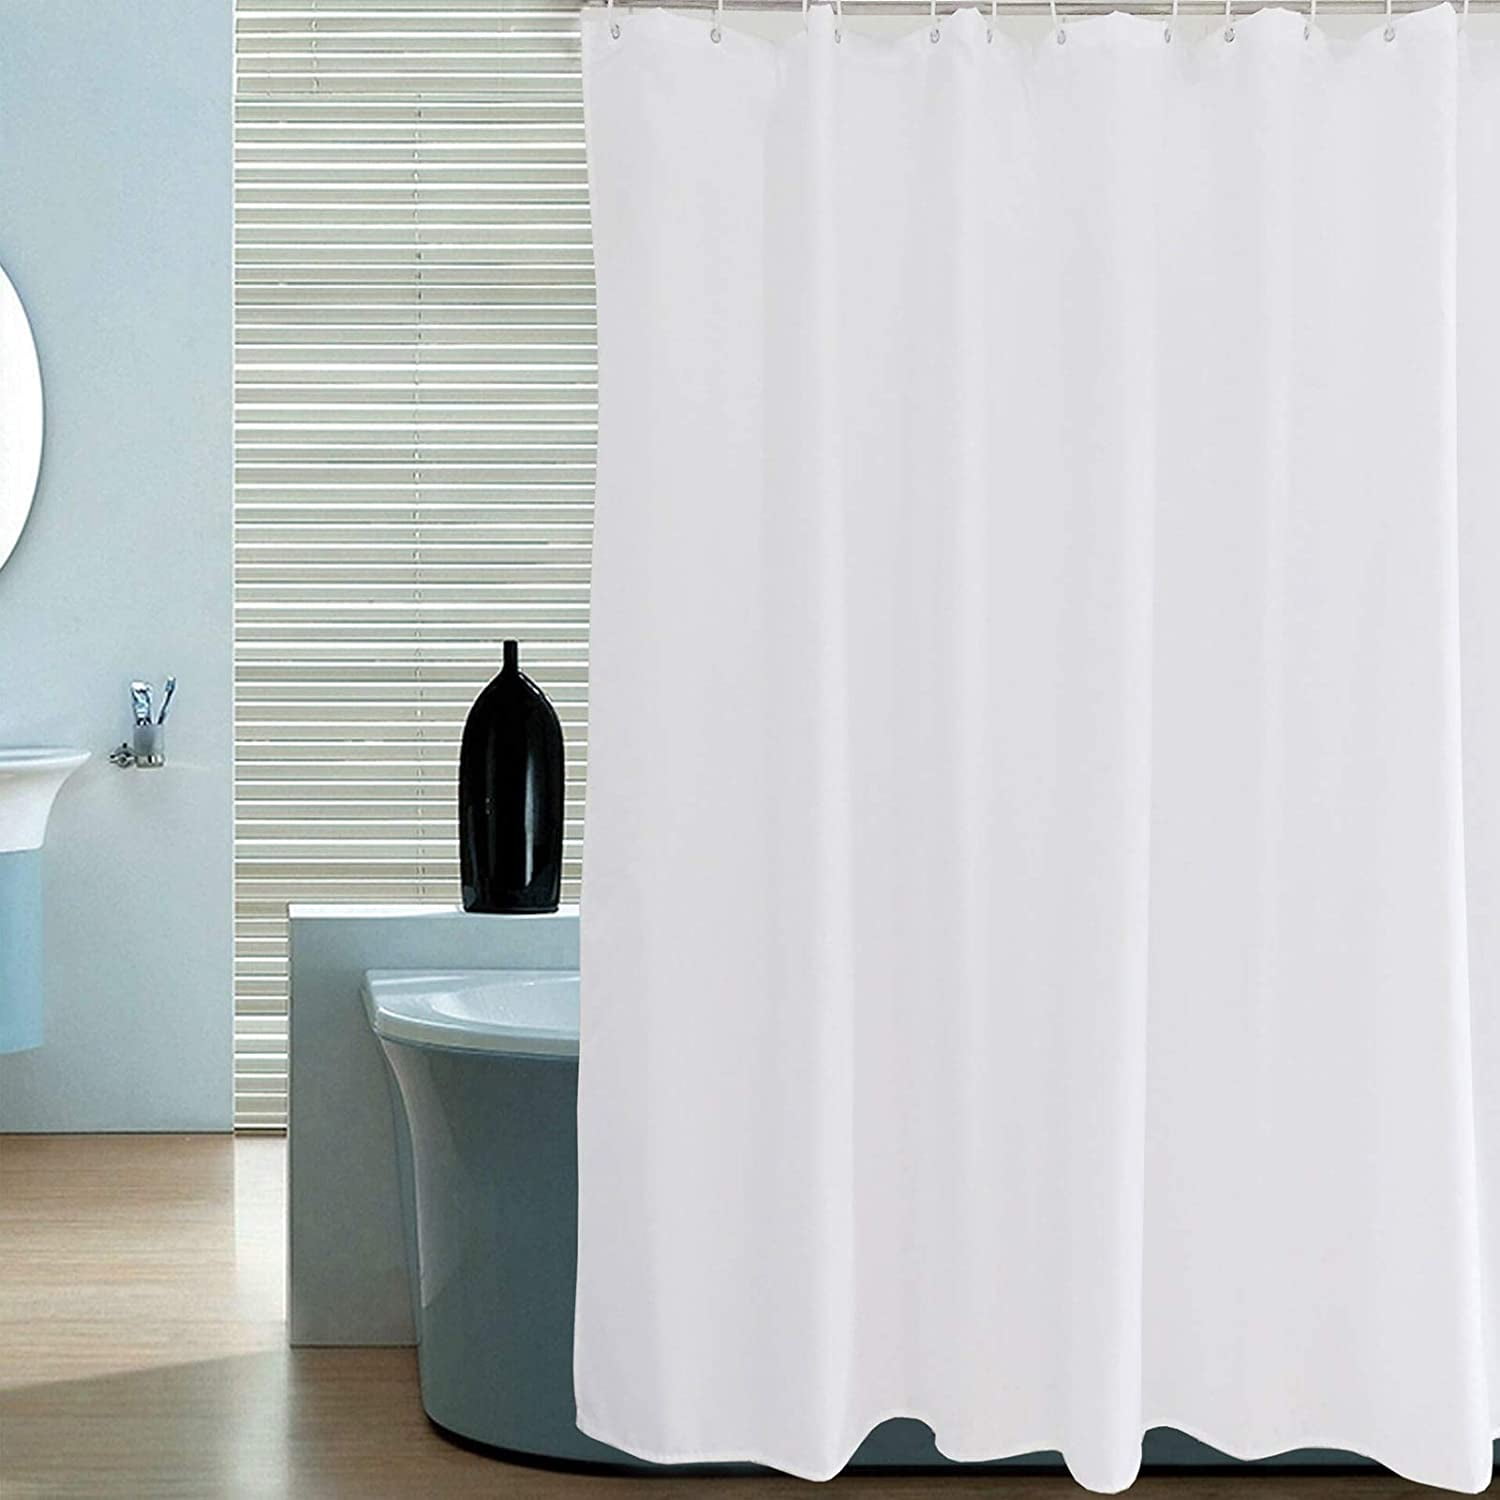 Niuta Shower Liner Standard, What Are The Standard Lengths Of Shower Curtains